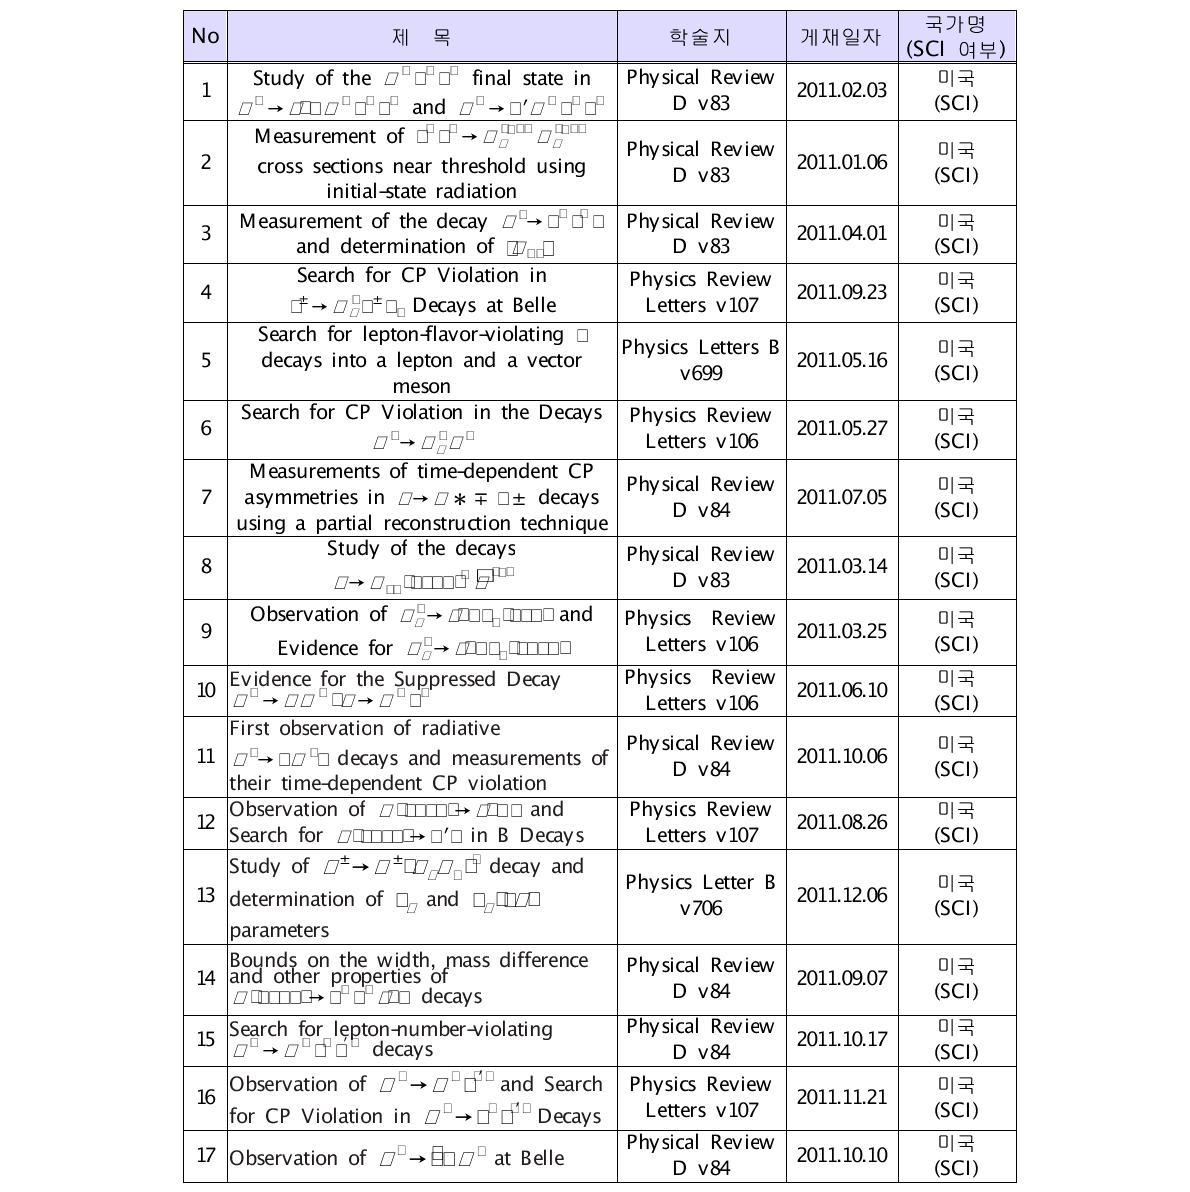 Journal papers indexed in SCI by the contribution from GSDC